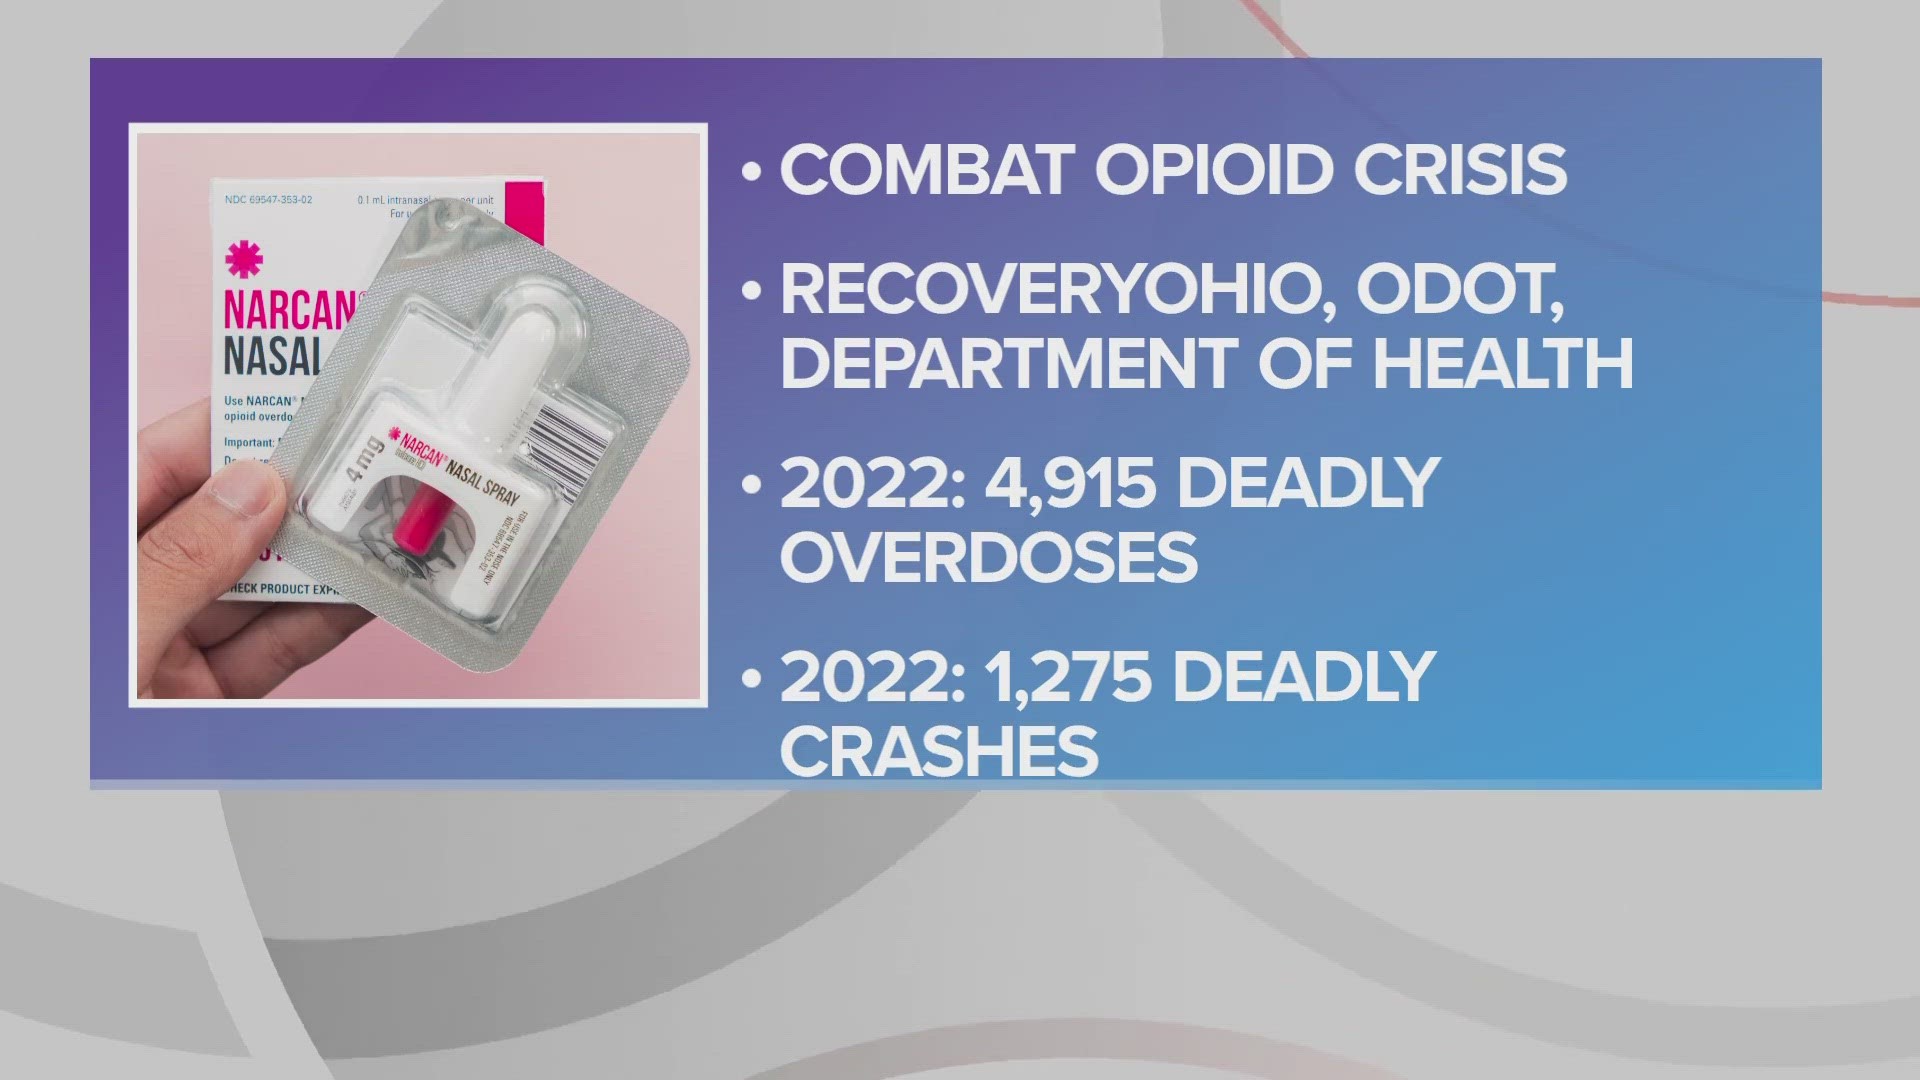 The state saw 4,915 deaths related to unintentional drug overdoses last year, according to the Ohio Department of Health.